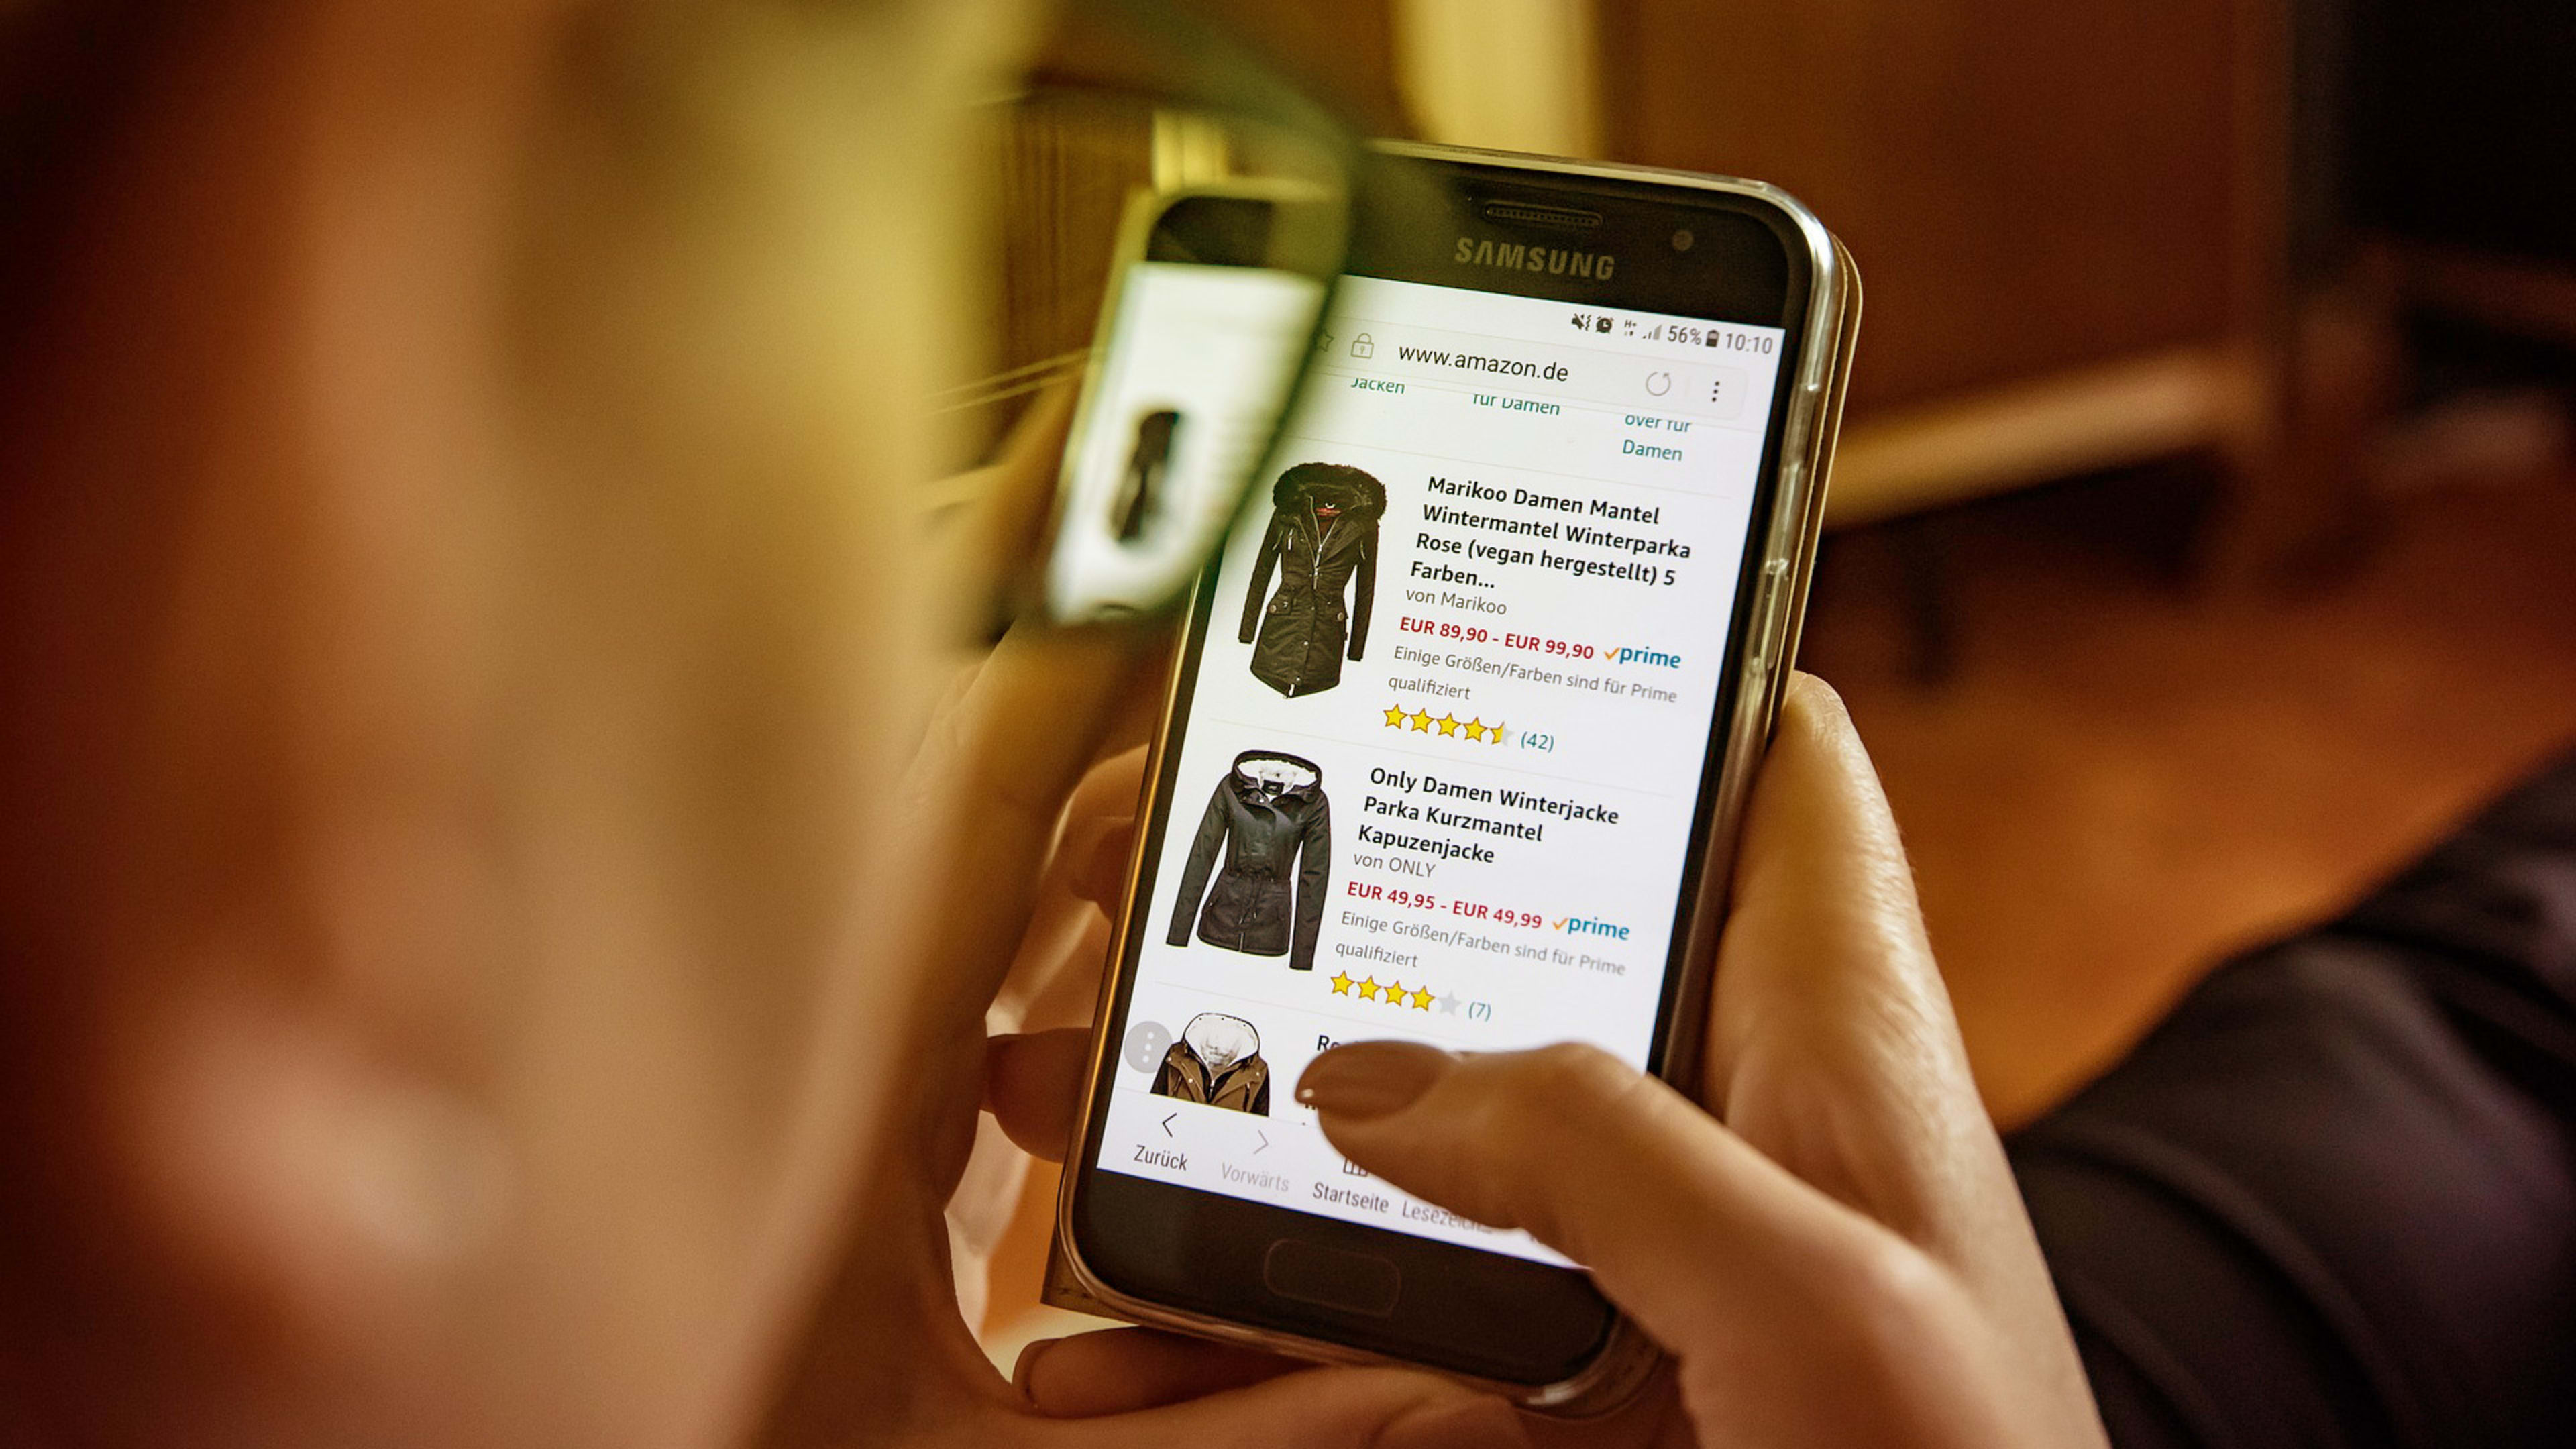 Amazon now lets global customers shop from its U.S. store